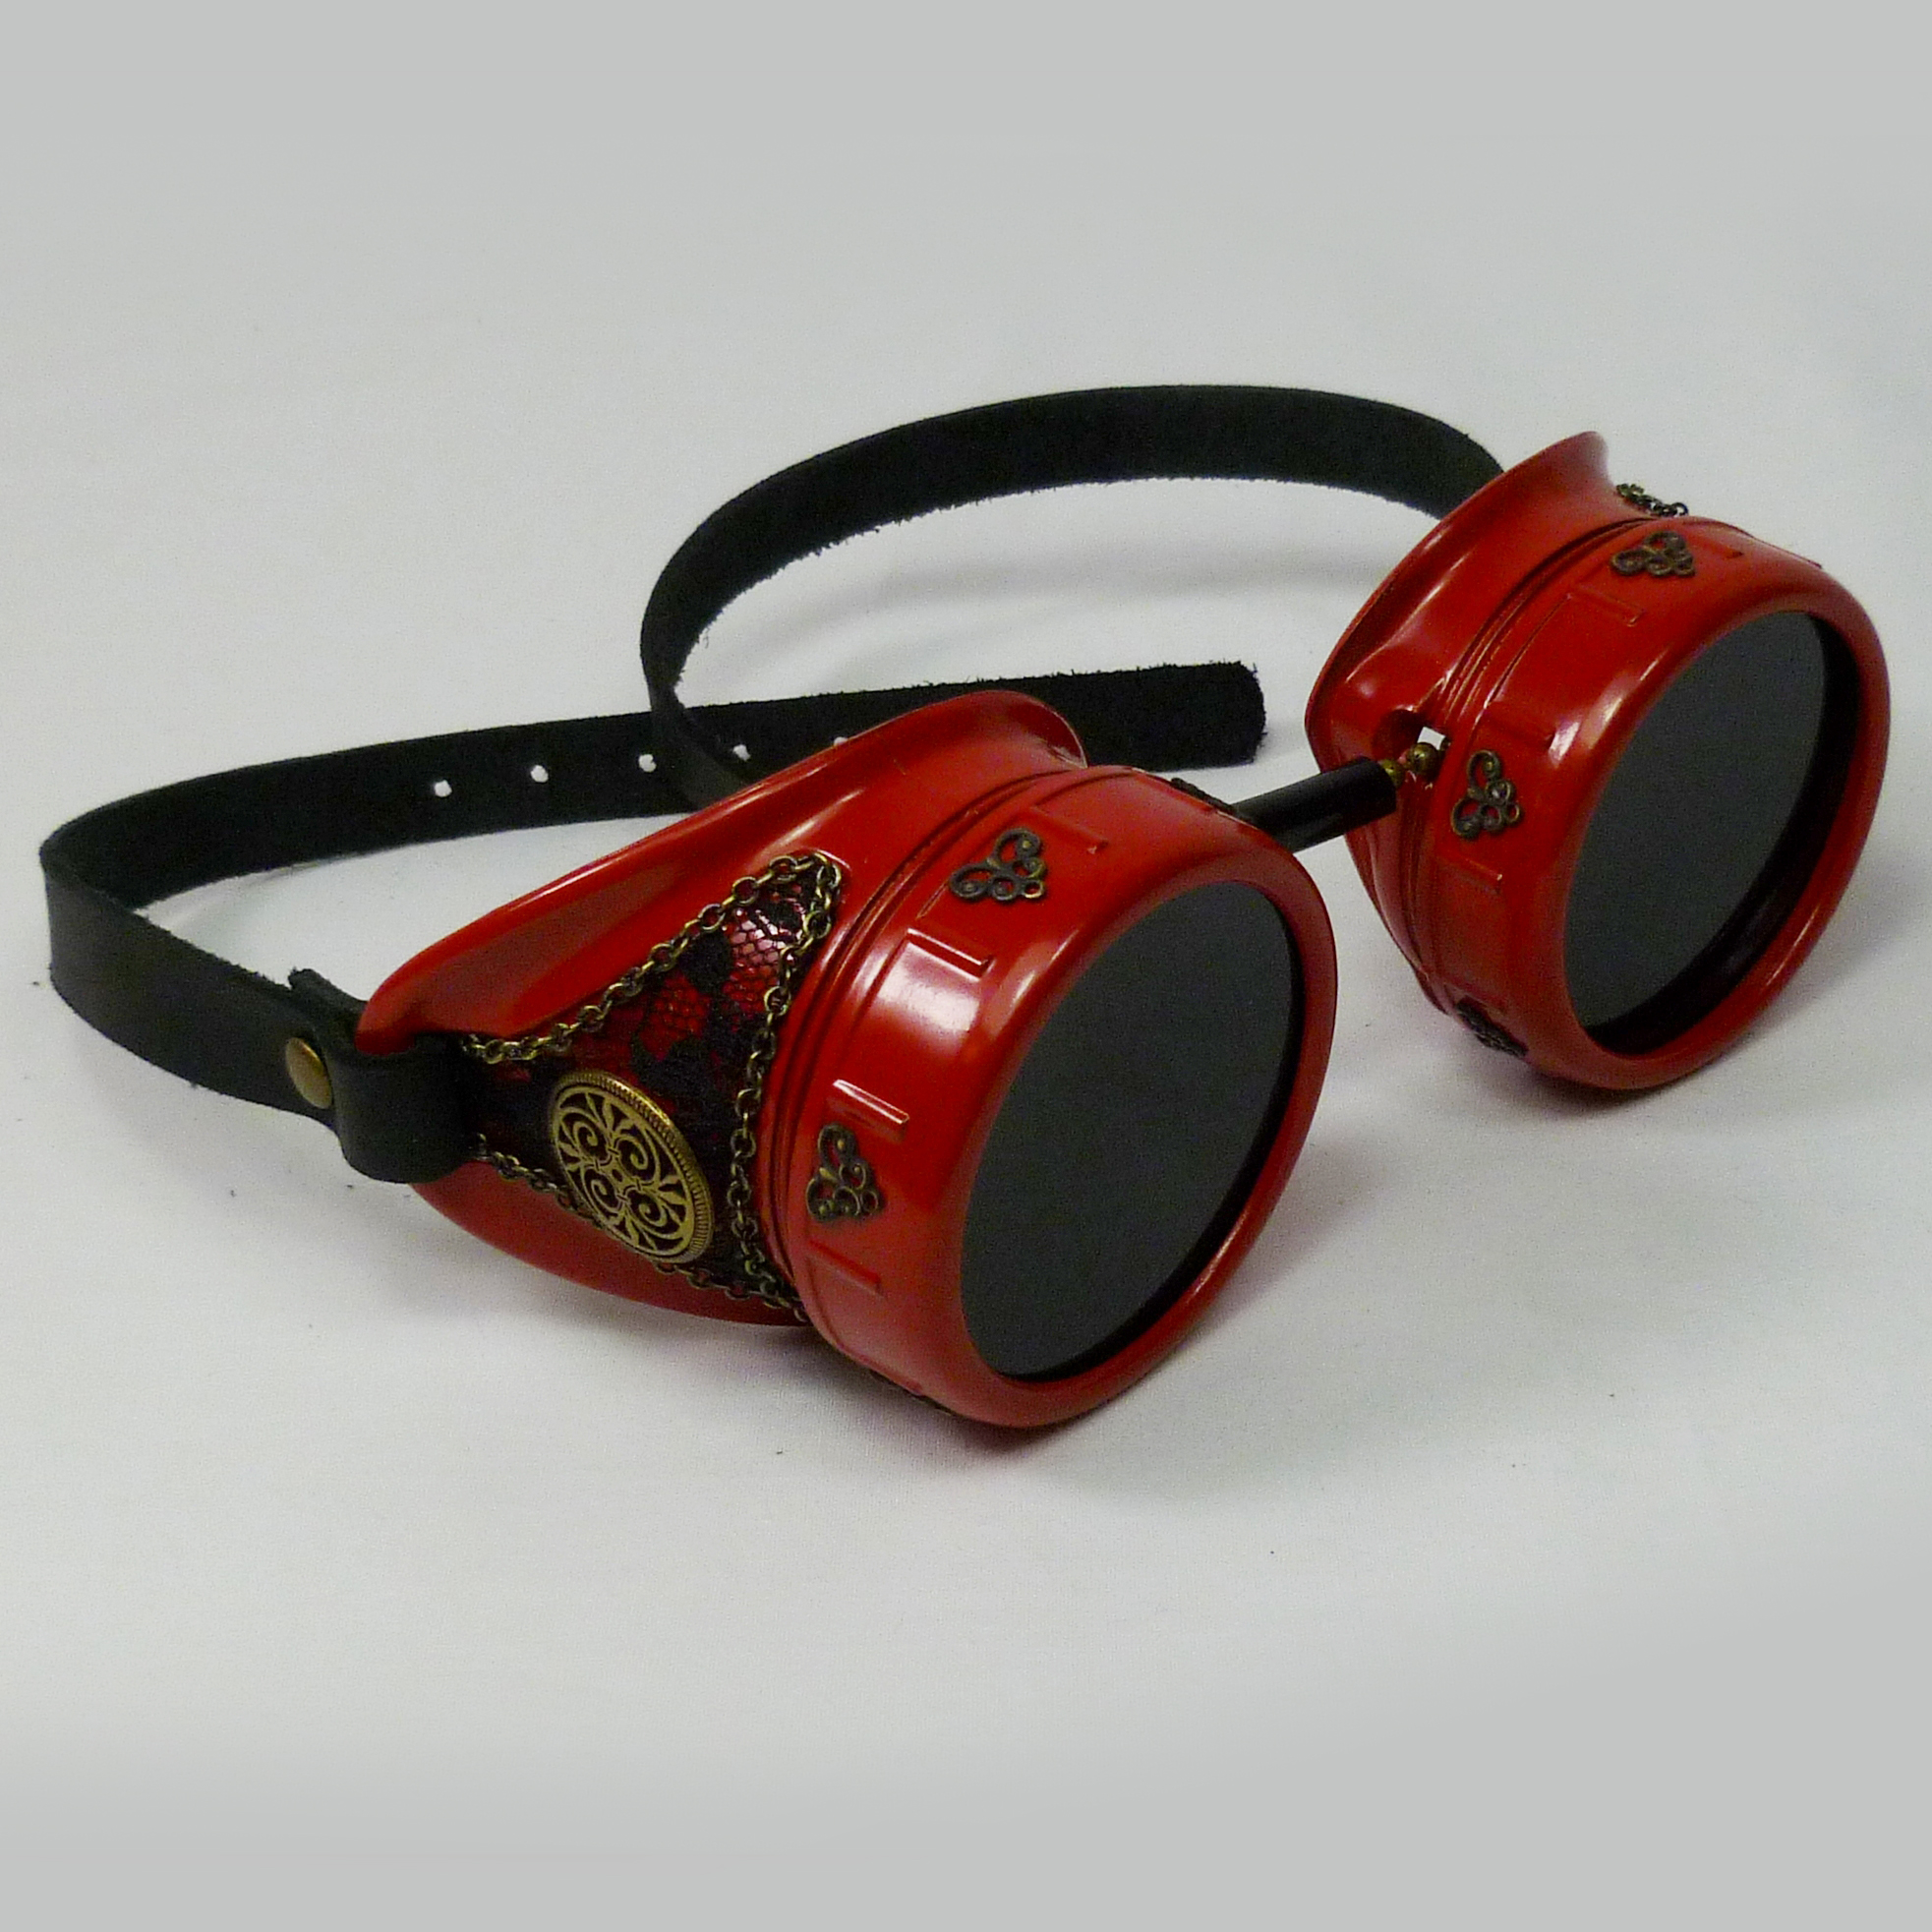 Goggles Make the Heart Grow Fonder – Awesome Goggles for Valentine’s Day!